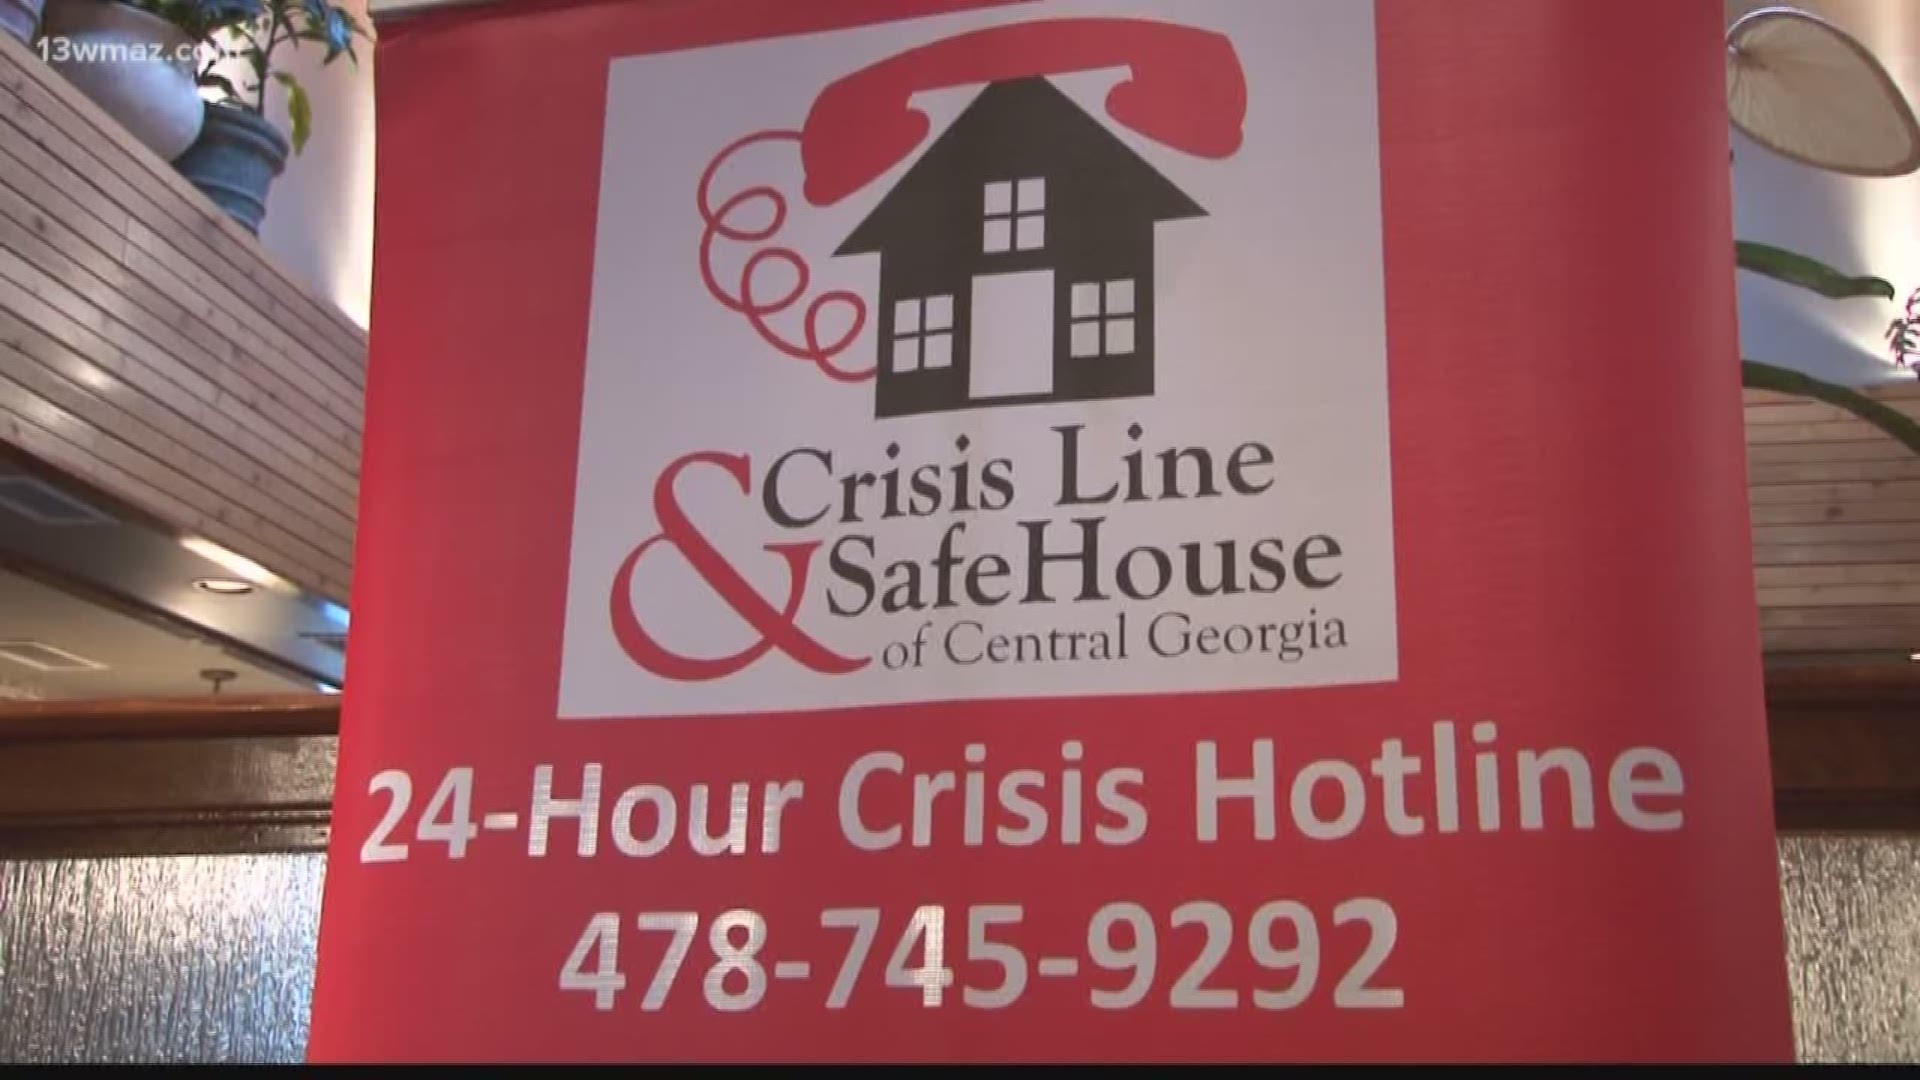 Celebrity servers fundraising for crisis line